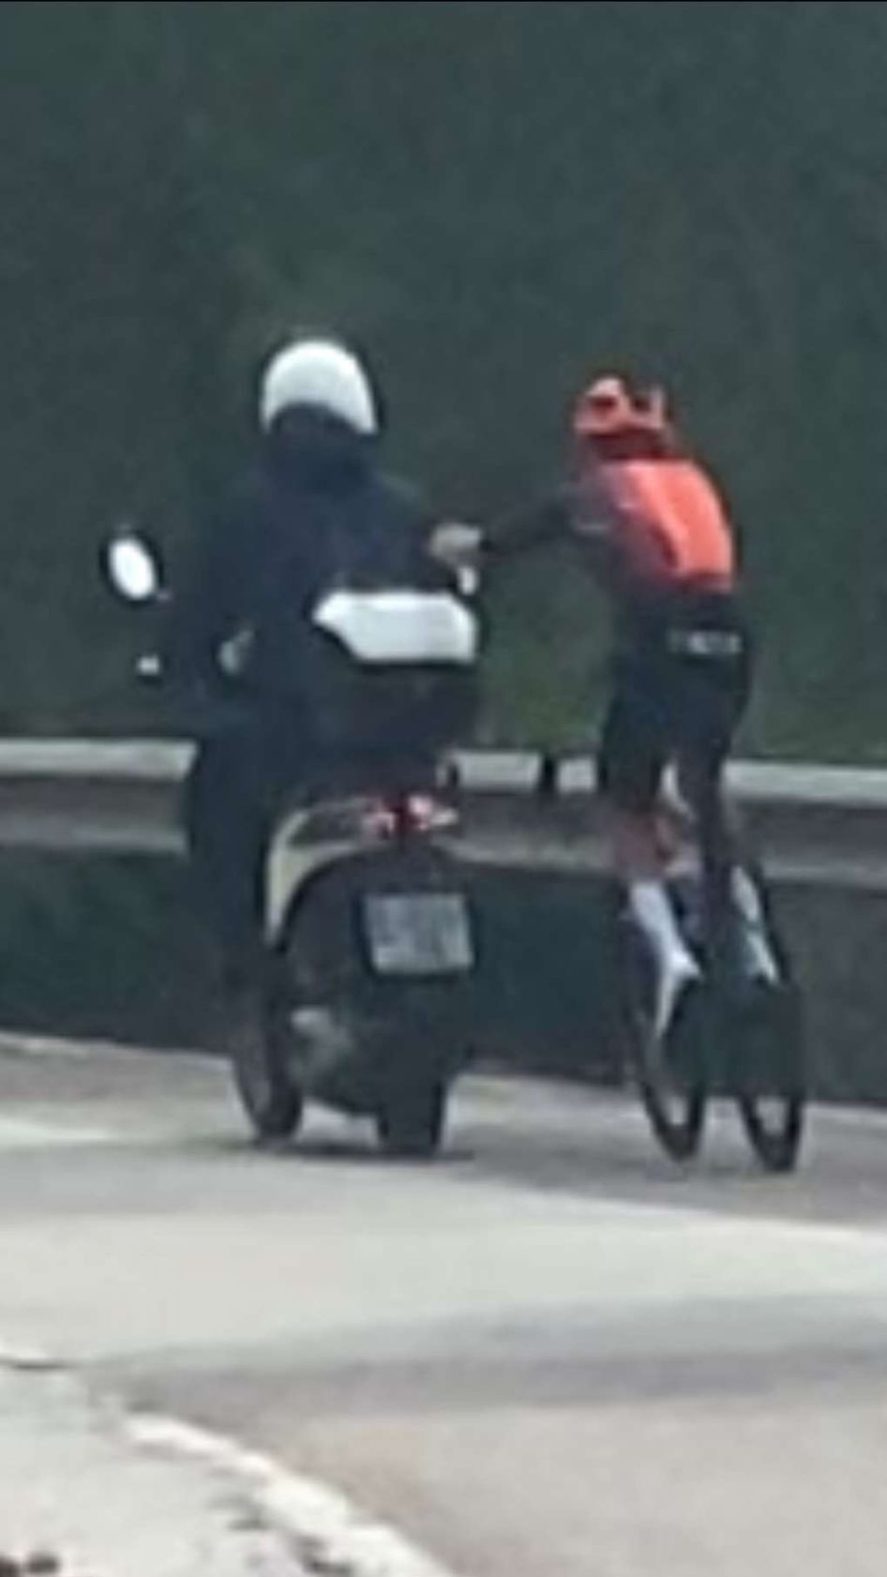 The image shows an Ineos Grenadiers rider holding onto a scooter.